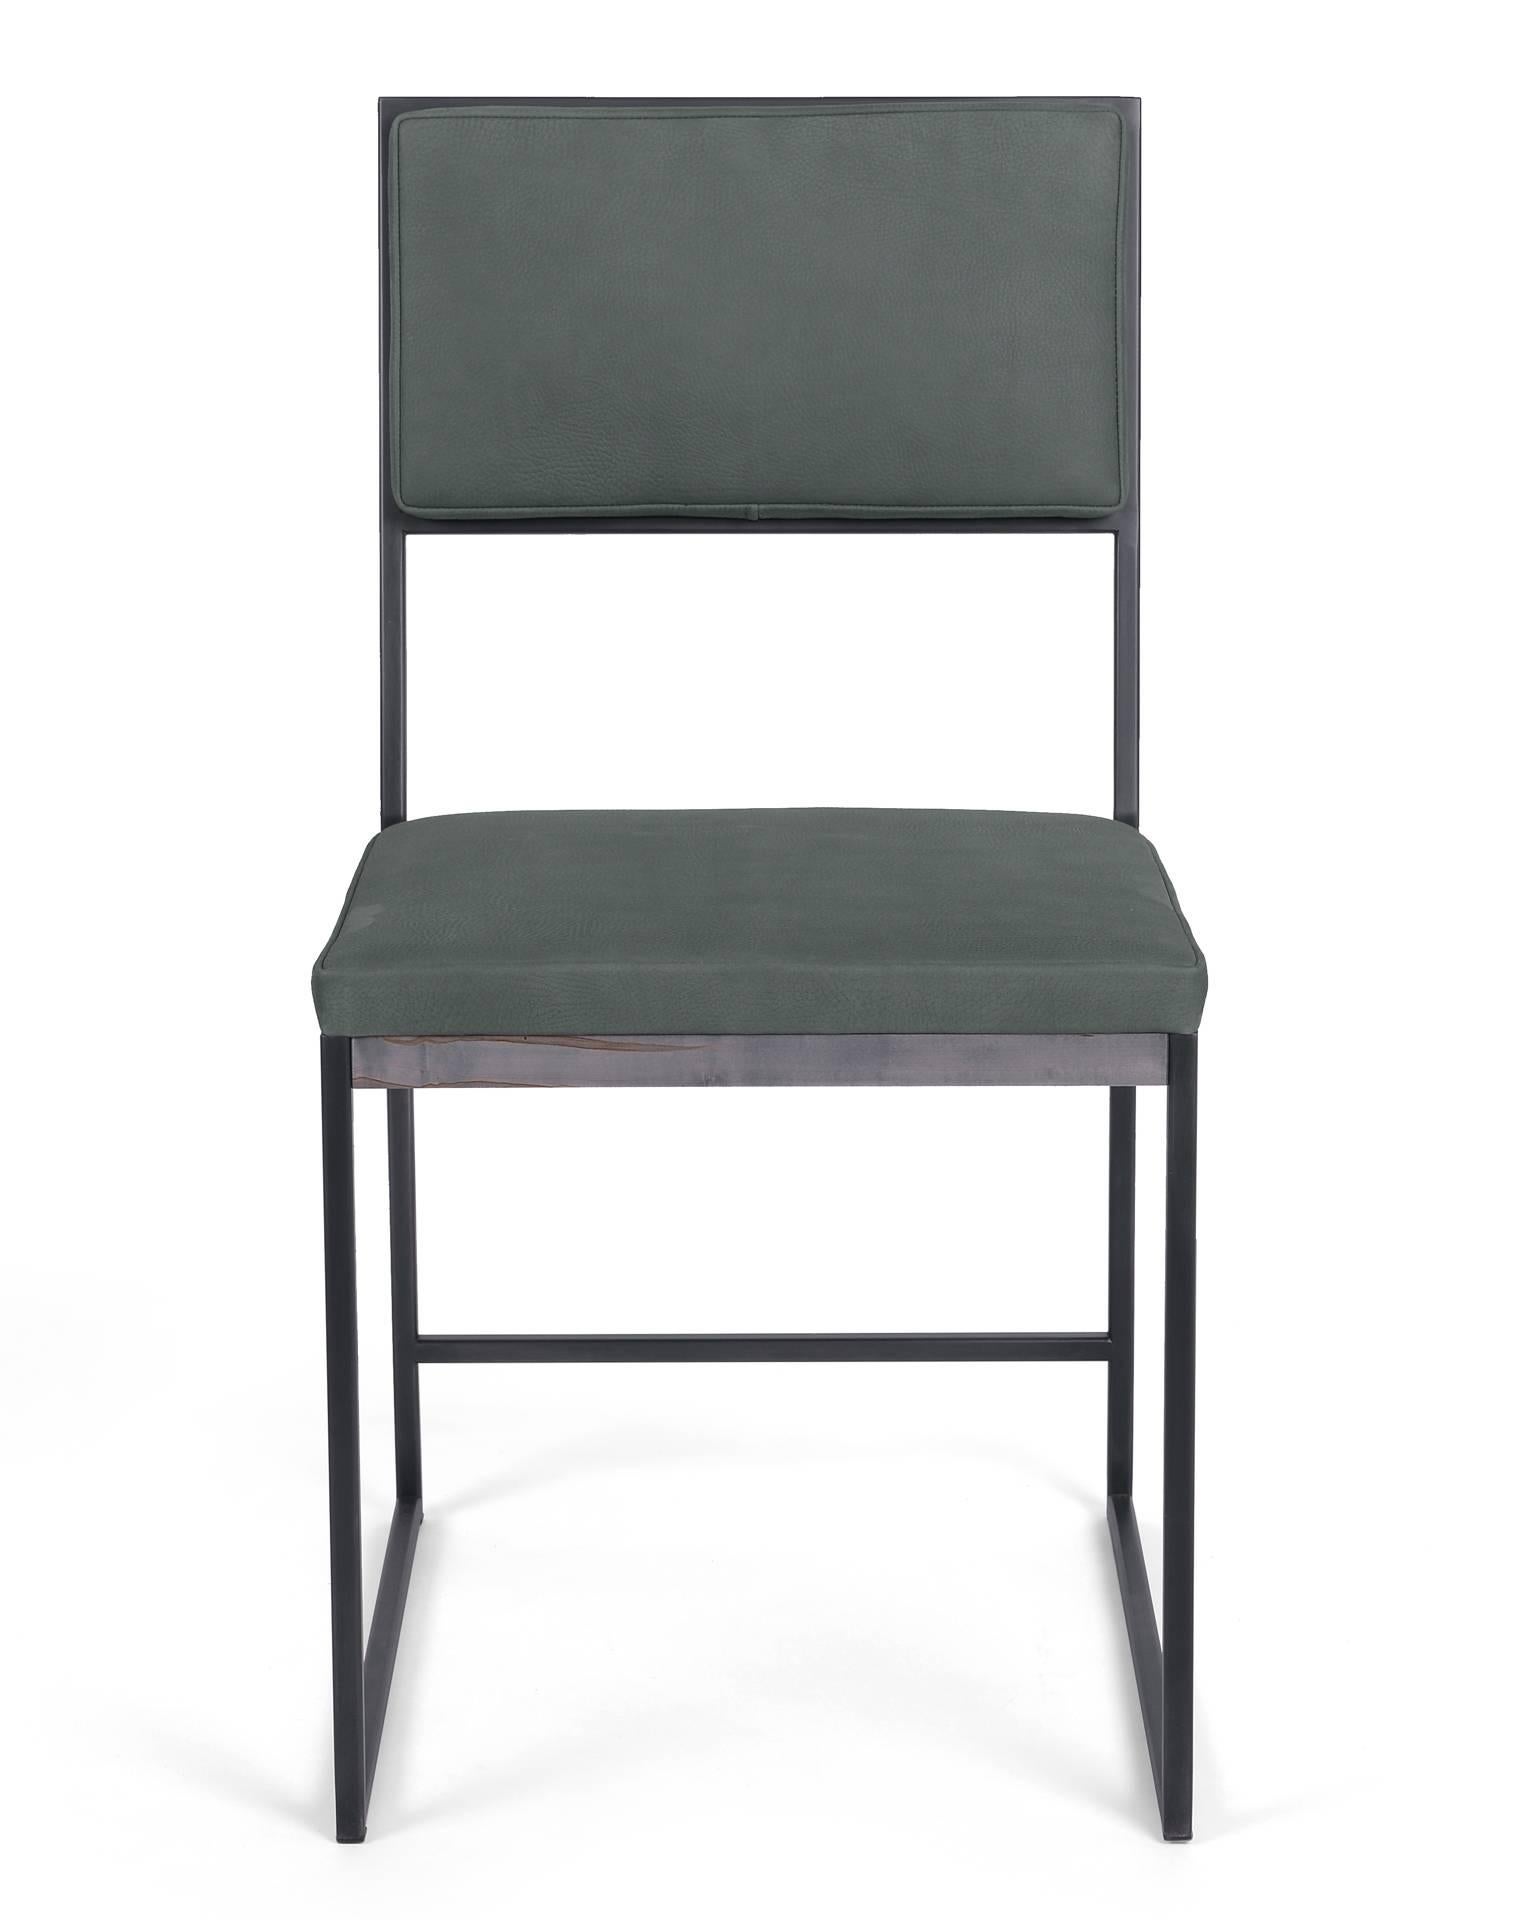 The sleek and modern Hendrick dining chair features clean lines and a luxurious leather upholstered seat and back, adding comfort and sophistication to any room. An oxidized ambrosia maple trim compliments the blackened steel frame. 

COM/COL